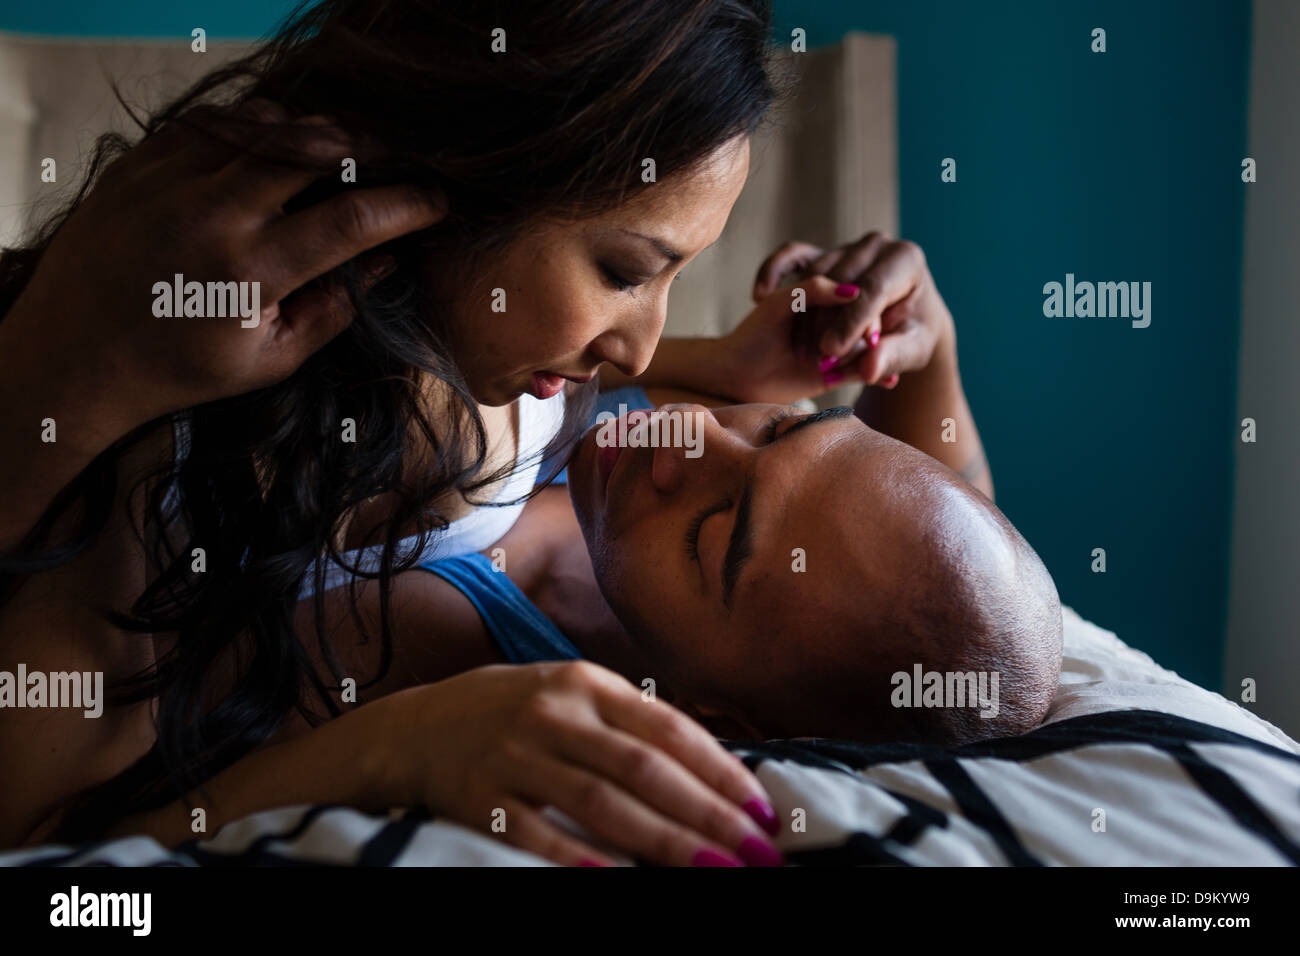 Couple kissing on bed Banque D'Images